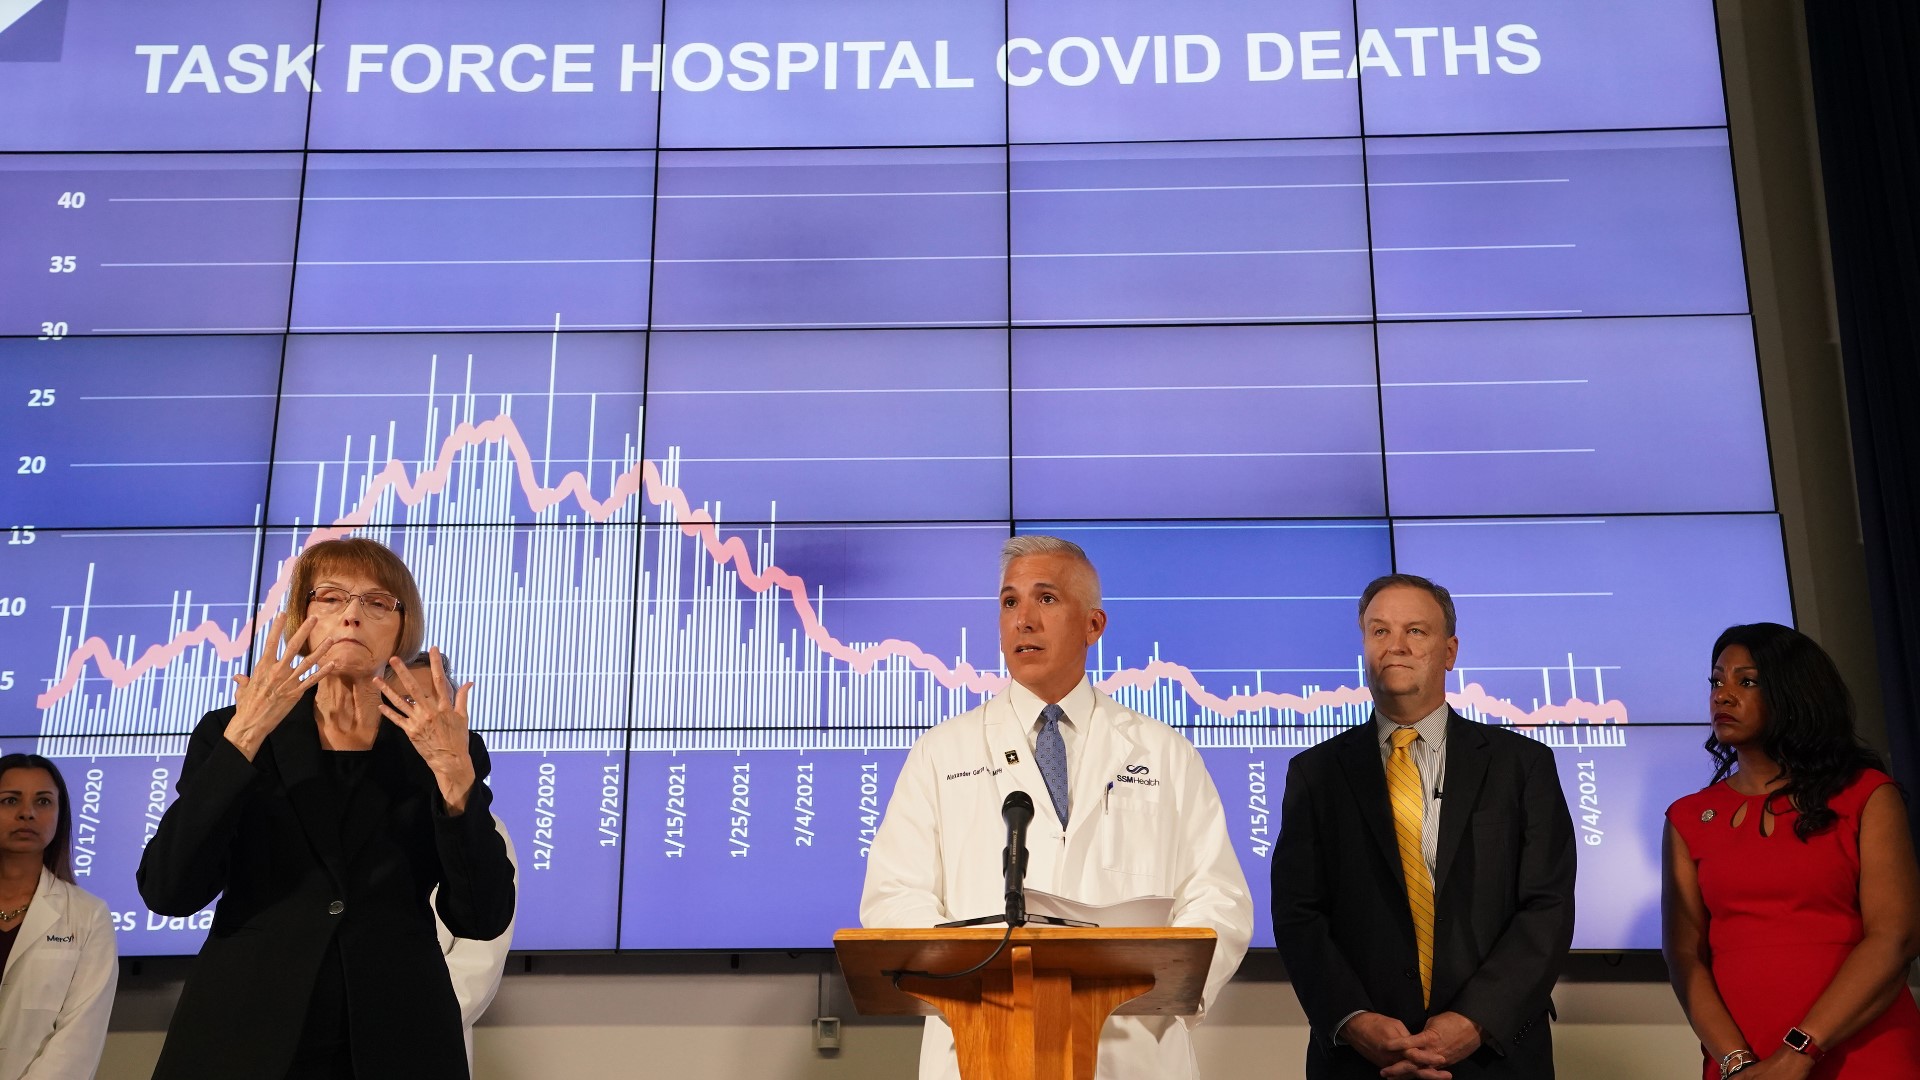 The St. Louis Metropolitan Pandemic Task Force held its final live briefing Monday, 14 months after it was formed during the beginning of the COVID-19 pandemic